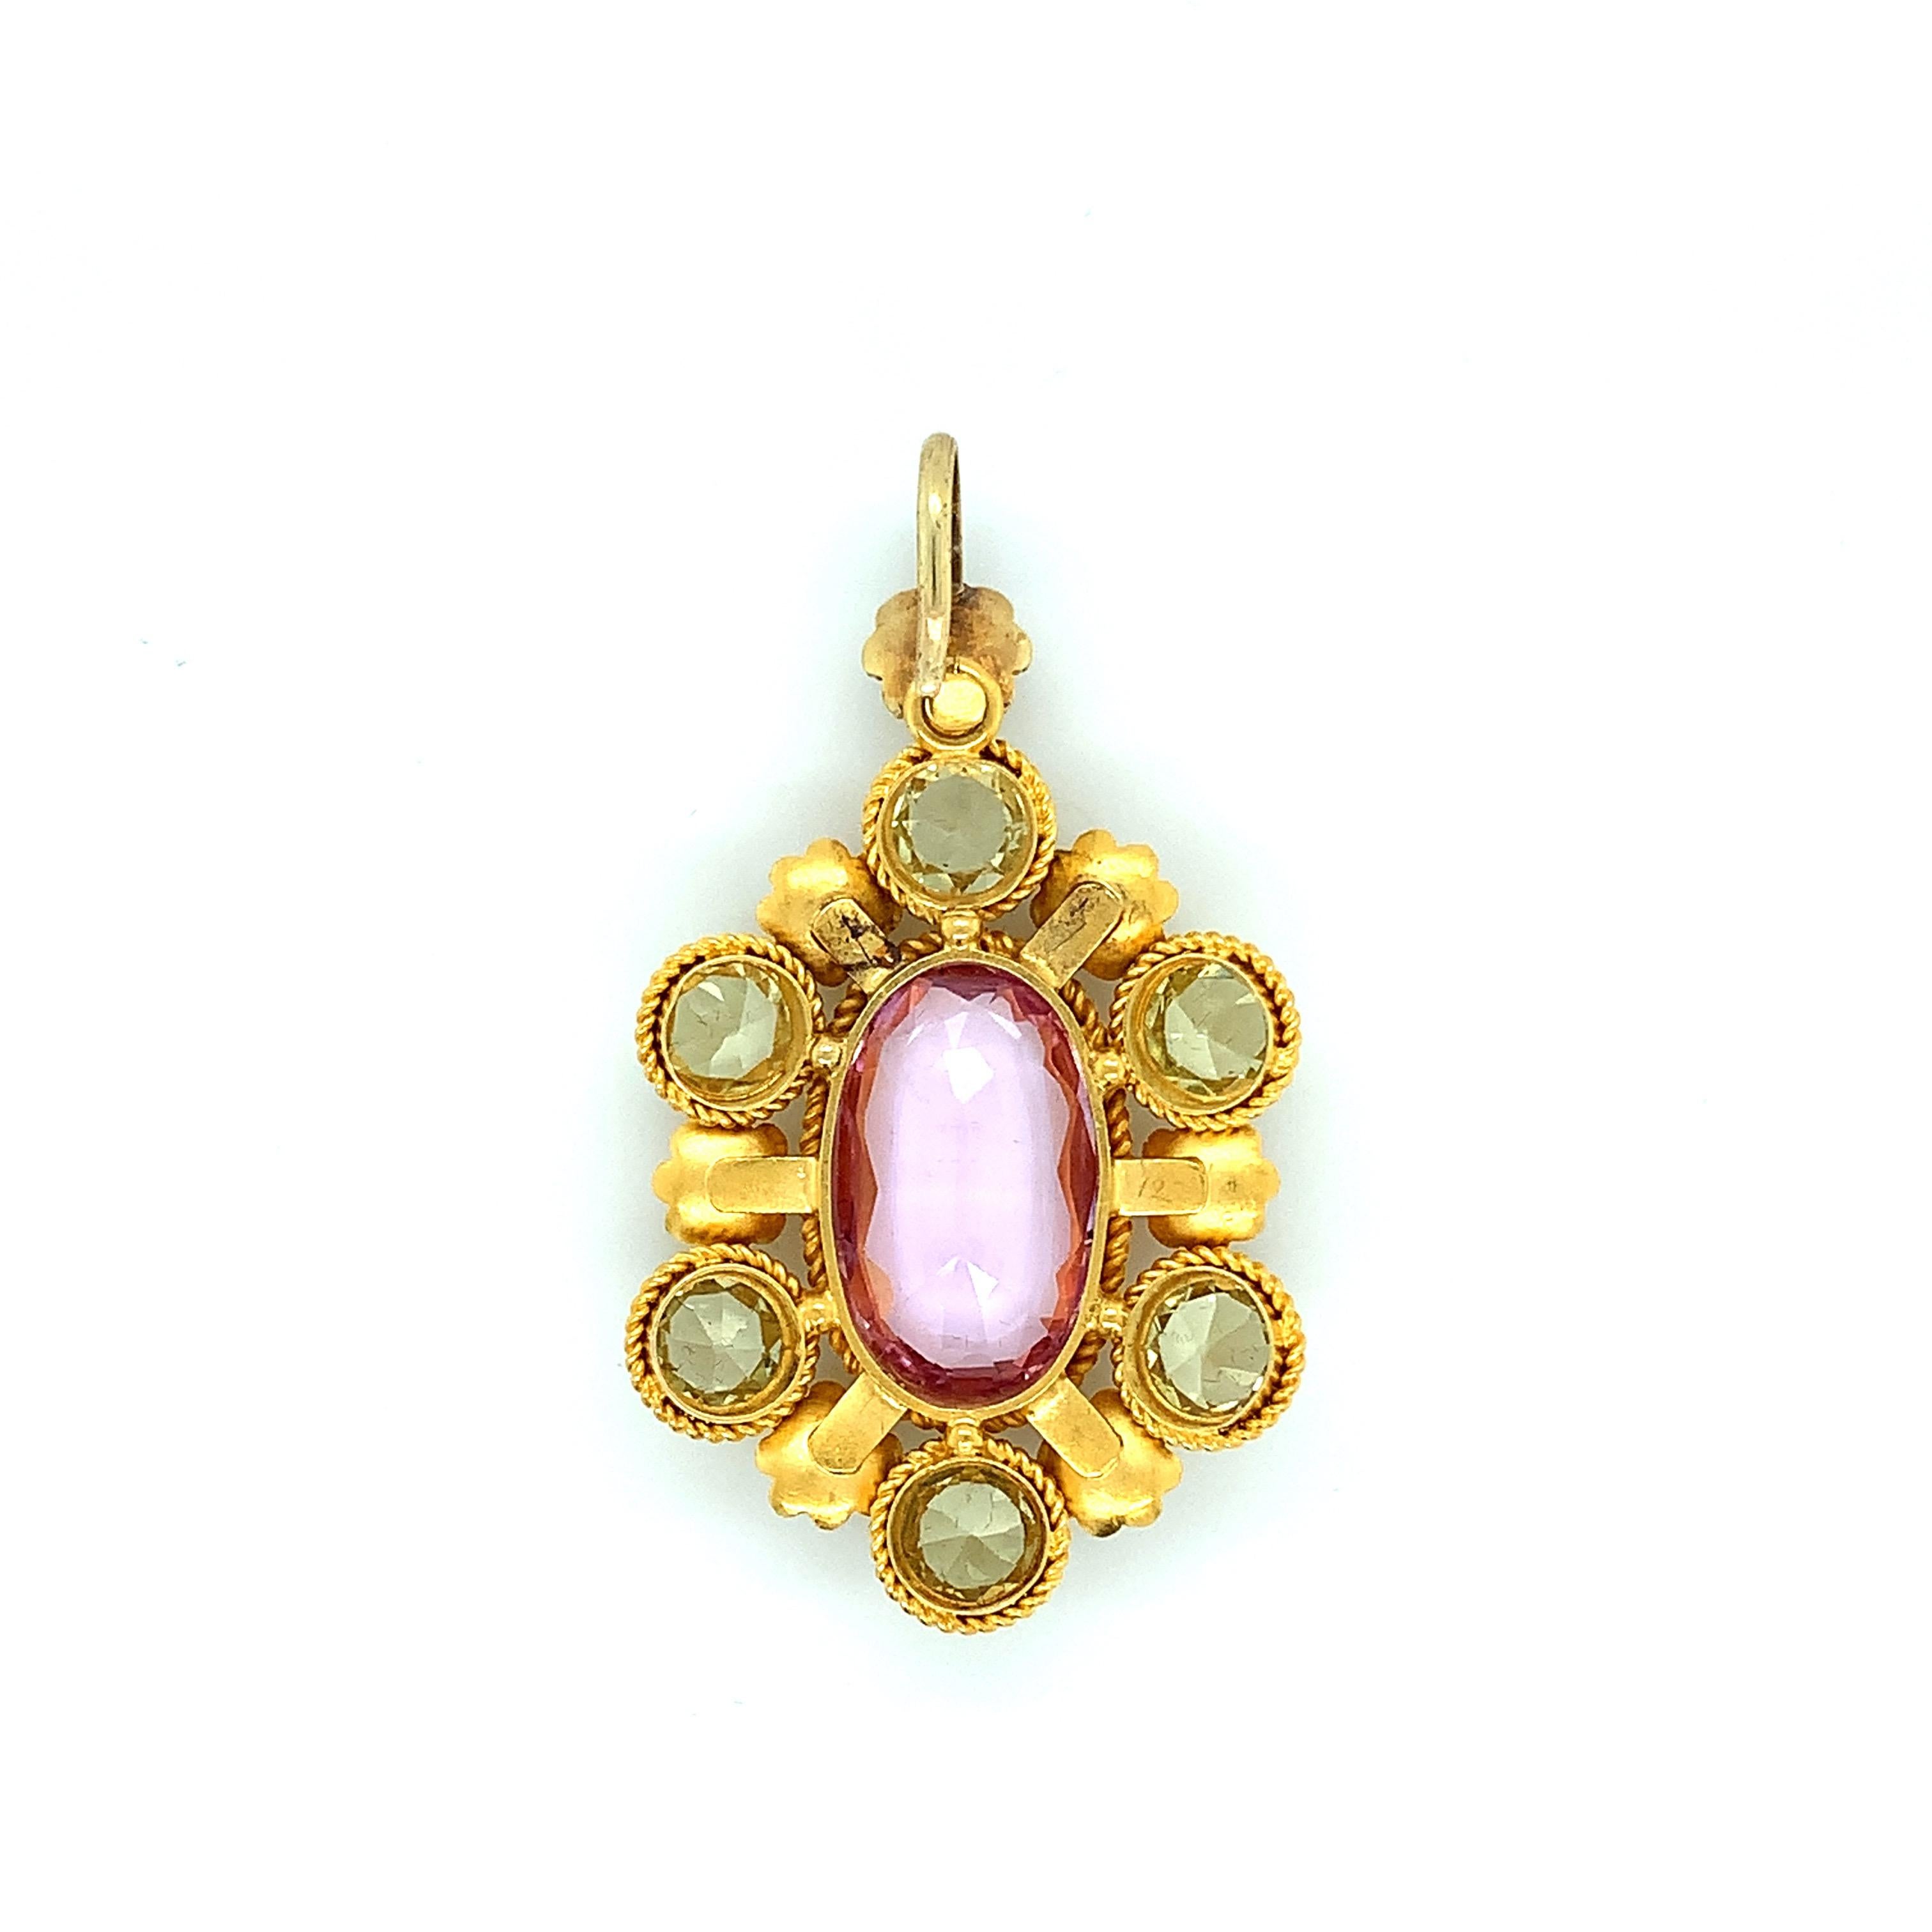 An 18 karat yellow gold antique pendant from the 1880s. At the center is a precious topaz weighing approximately 10 carats. Surrounding this center are six quartz stones weighing approximately 3 carats as well as seven small pearls. Total weight: